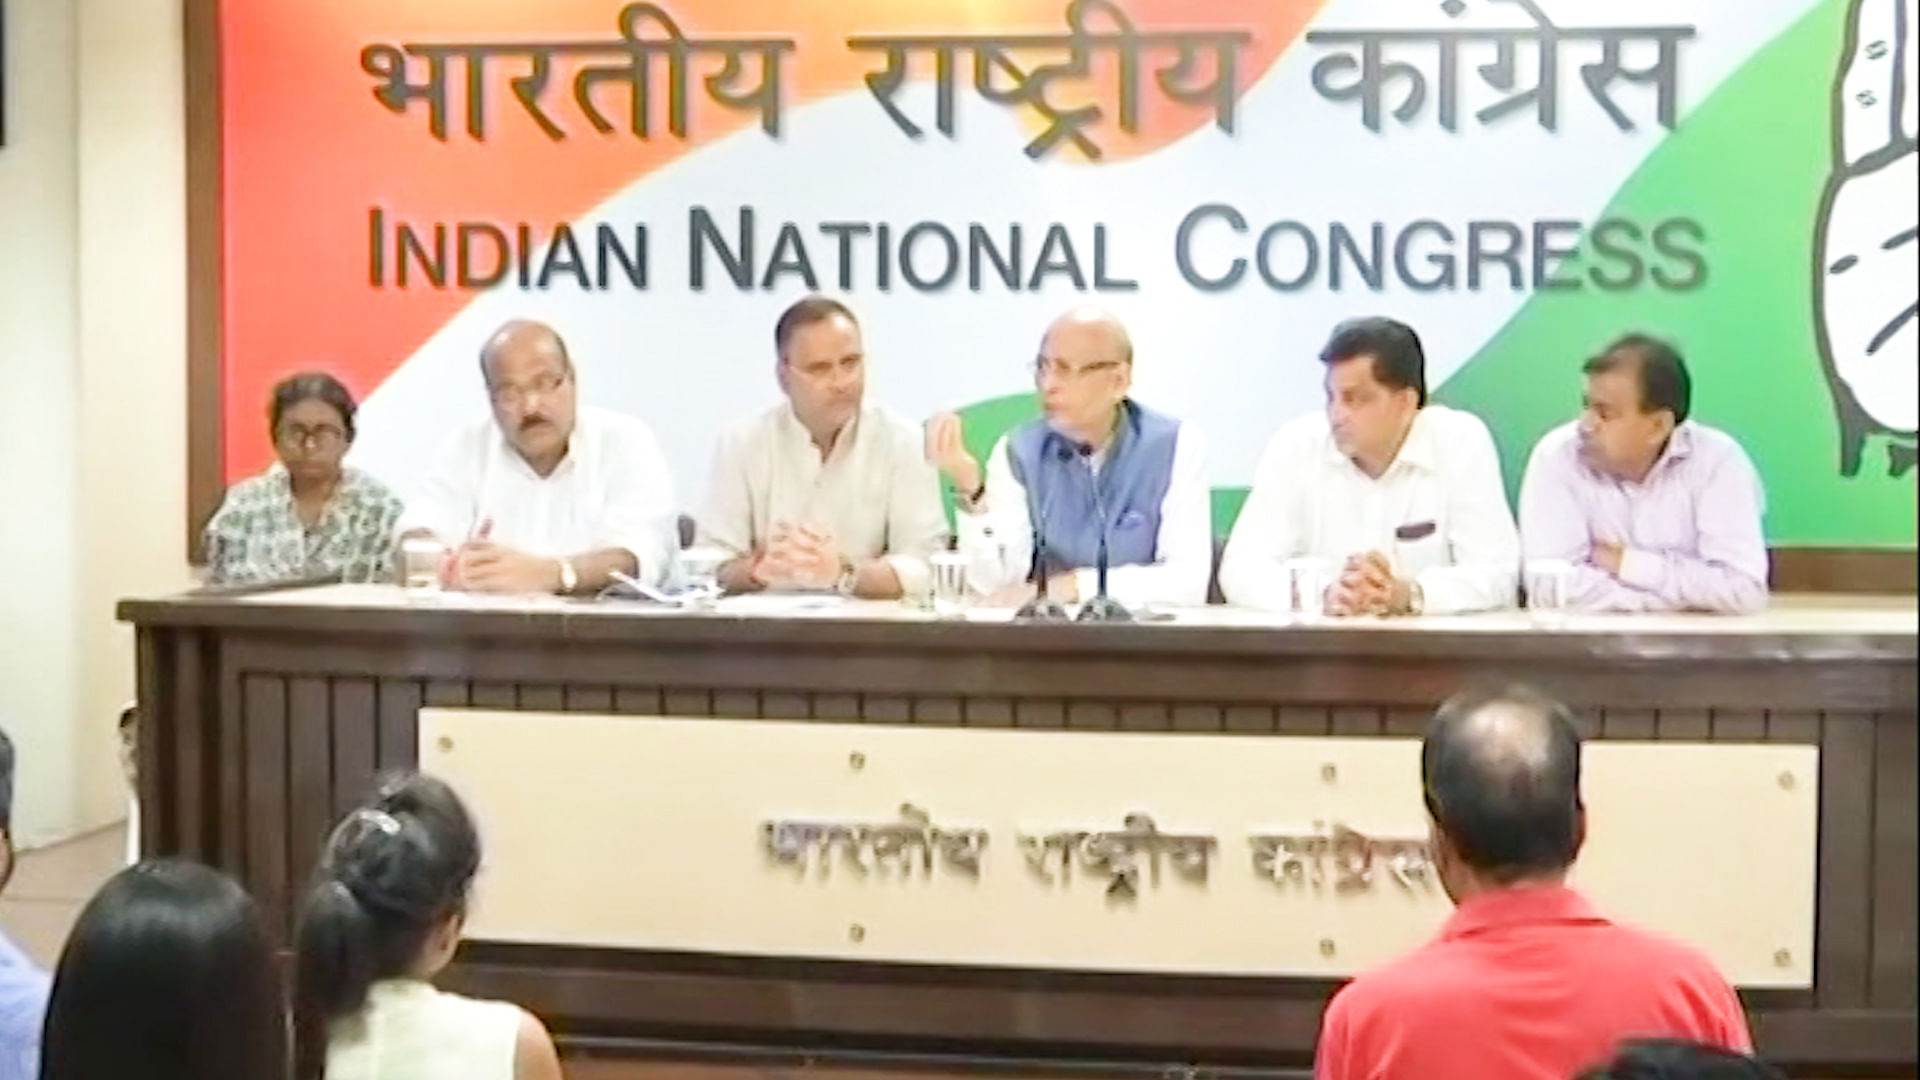 In a press conference, Congress leader Abhishek Manu Singhvi asked why announcement of Gujarat Polls was delayed?